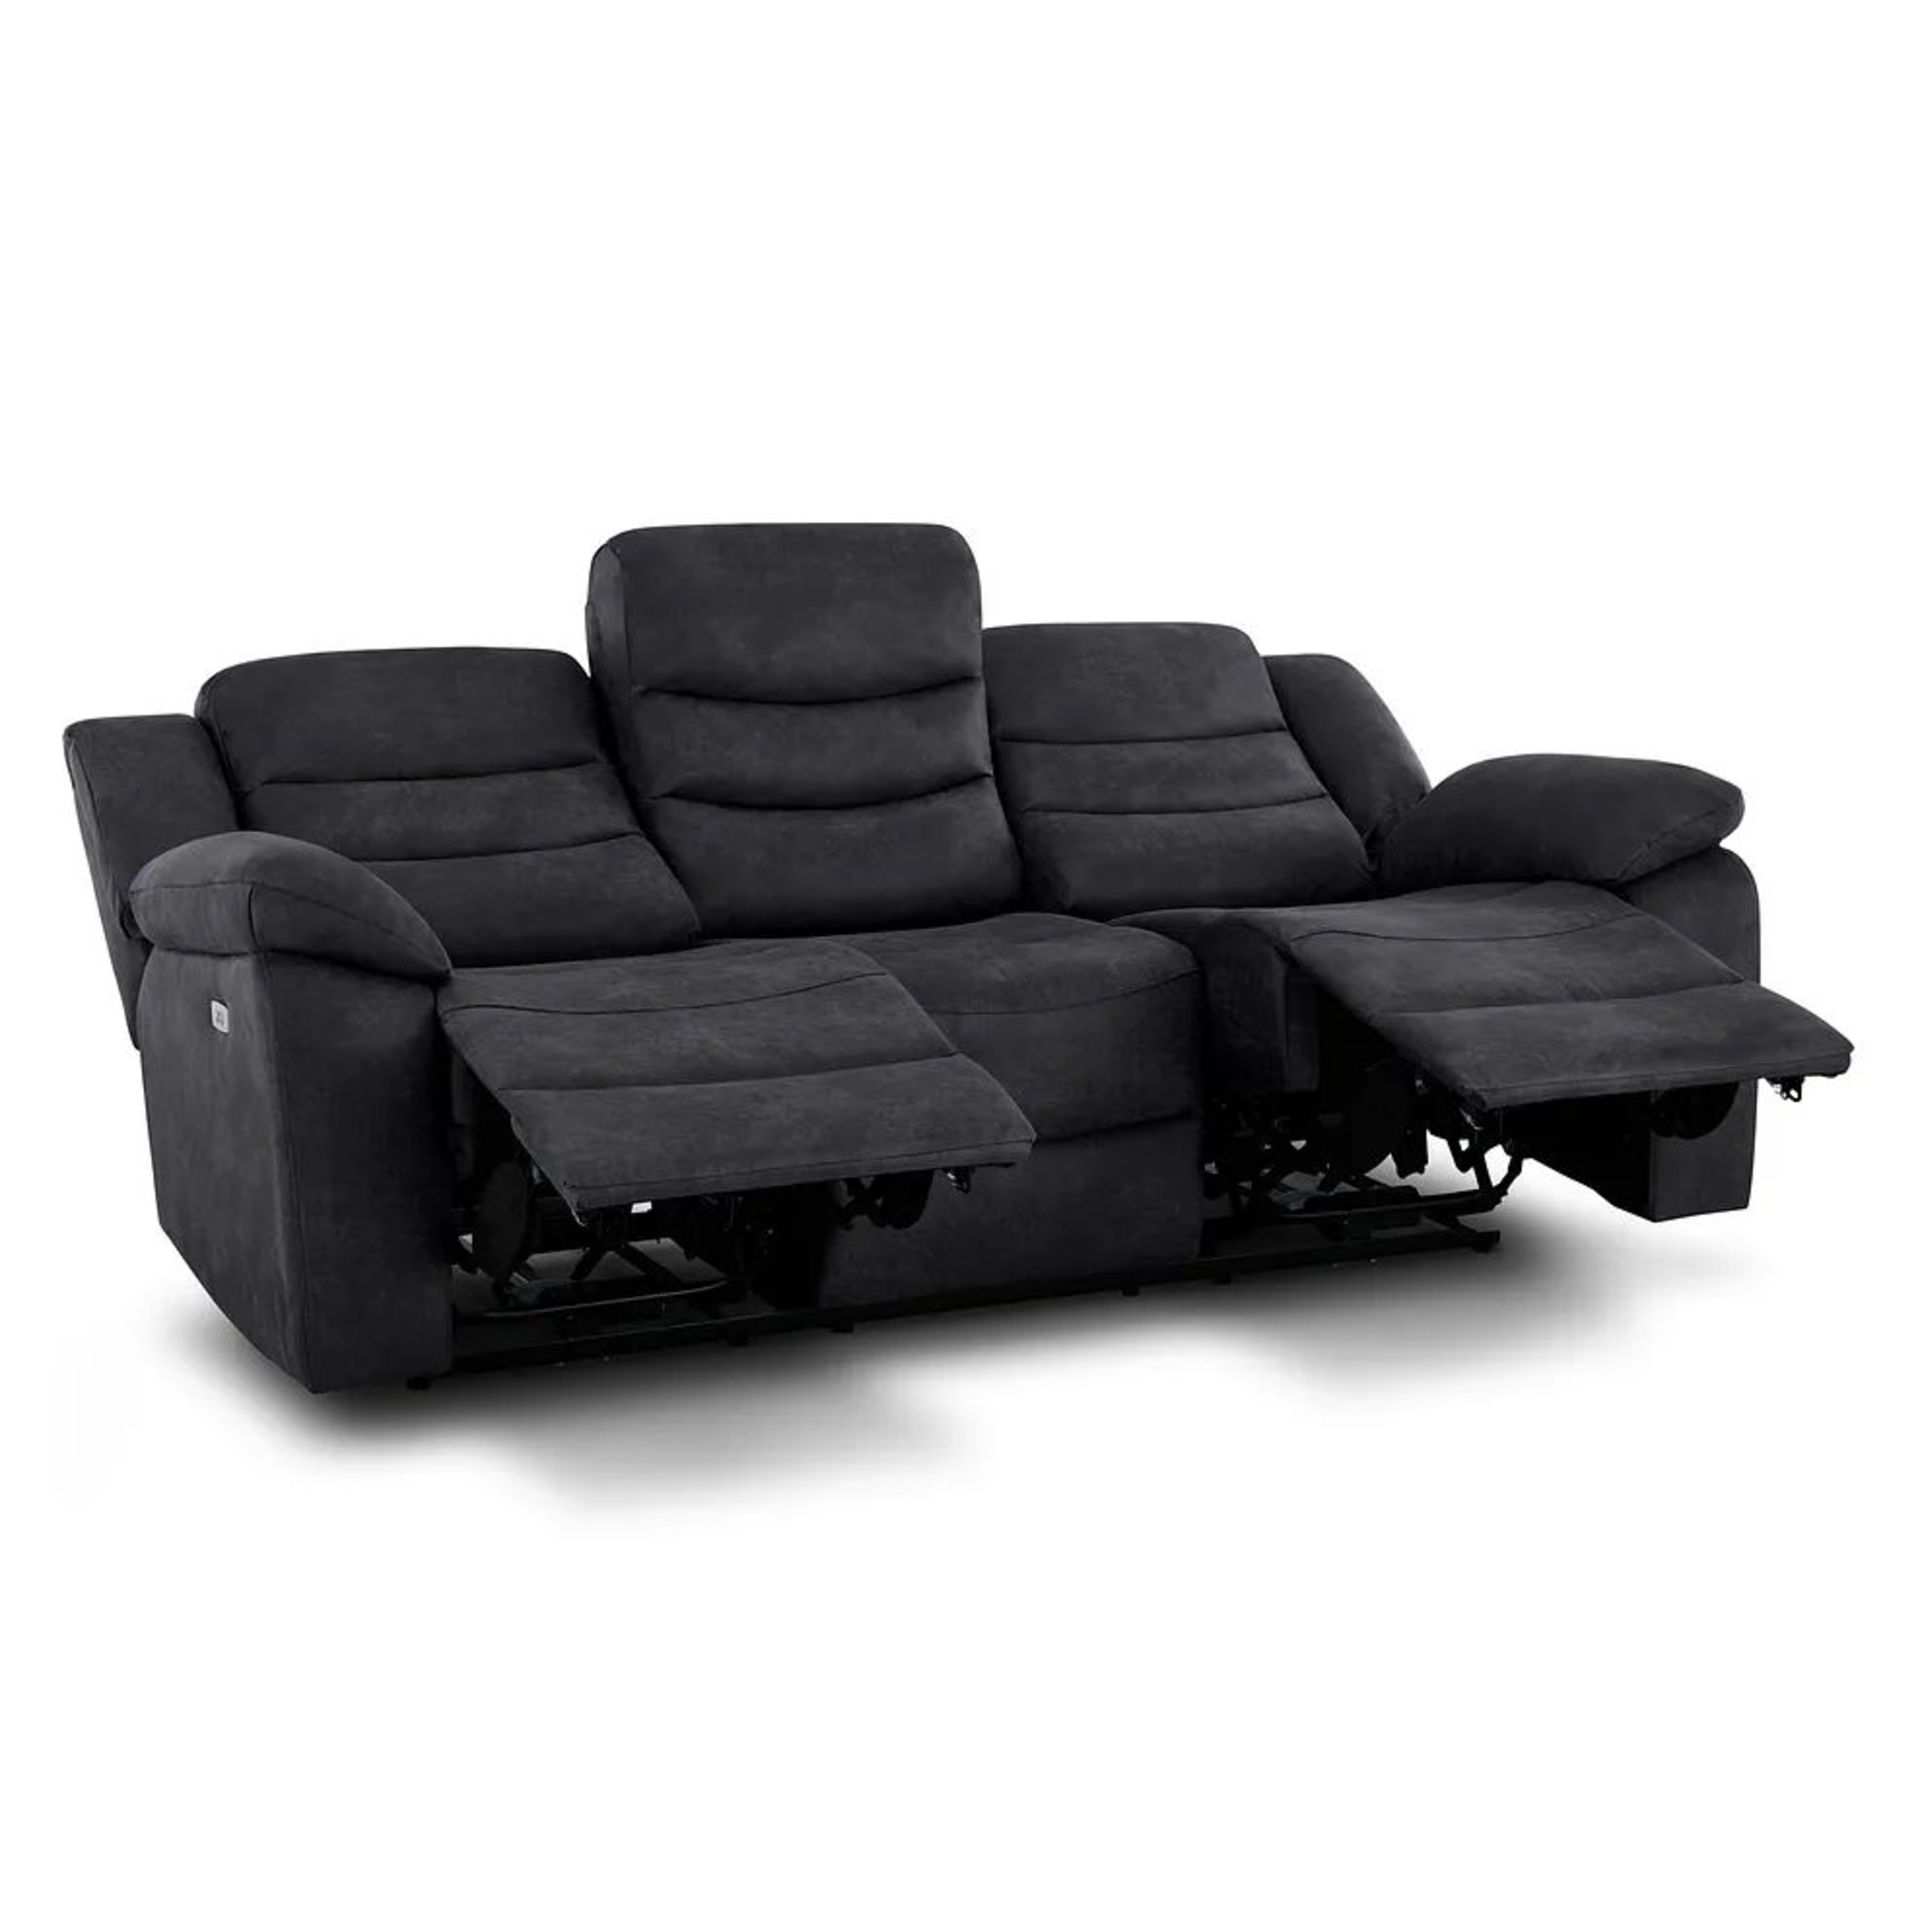 BRAND NEW MARLOW 3 Seater Electric Recliner Sofa - MILLER GREY FABRIC. RRP £1199. Designed to suit - Bild 5 aus 12